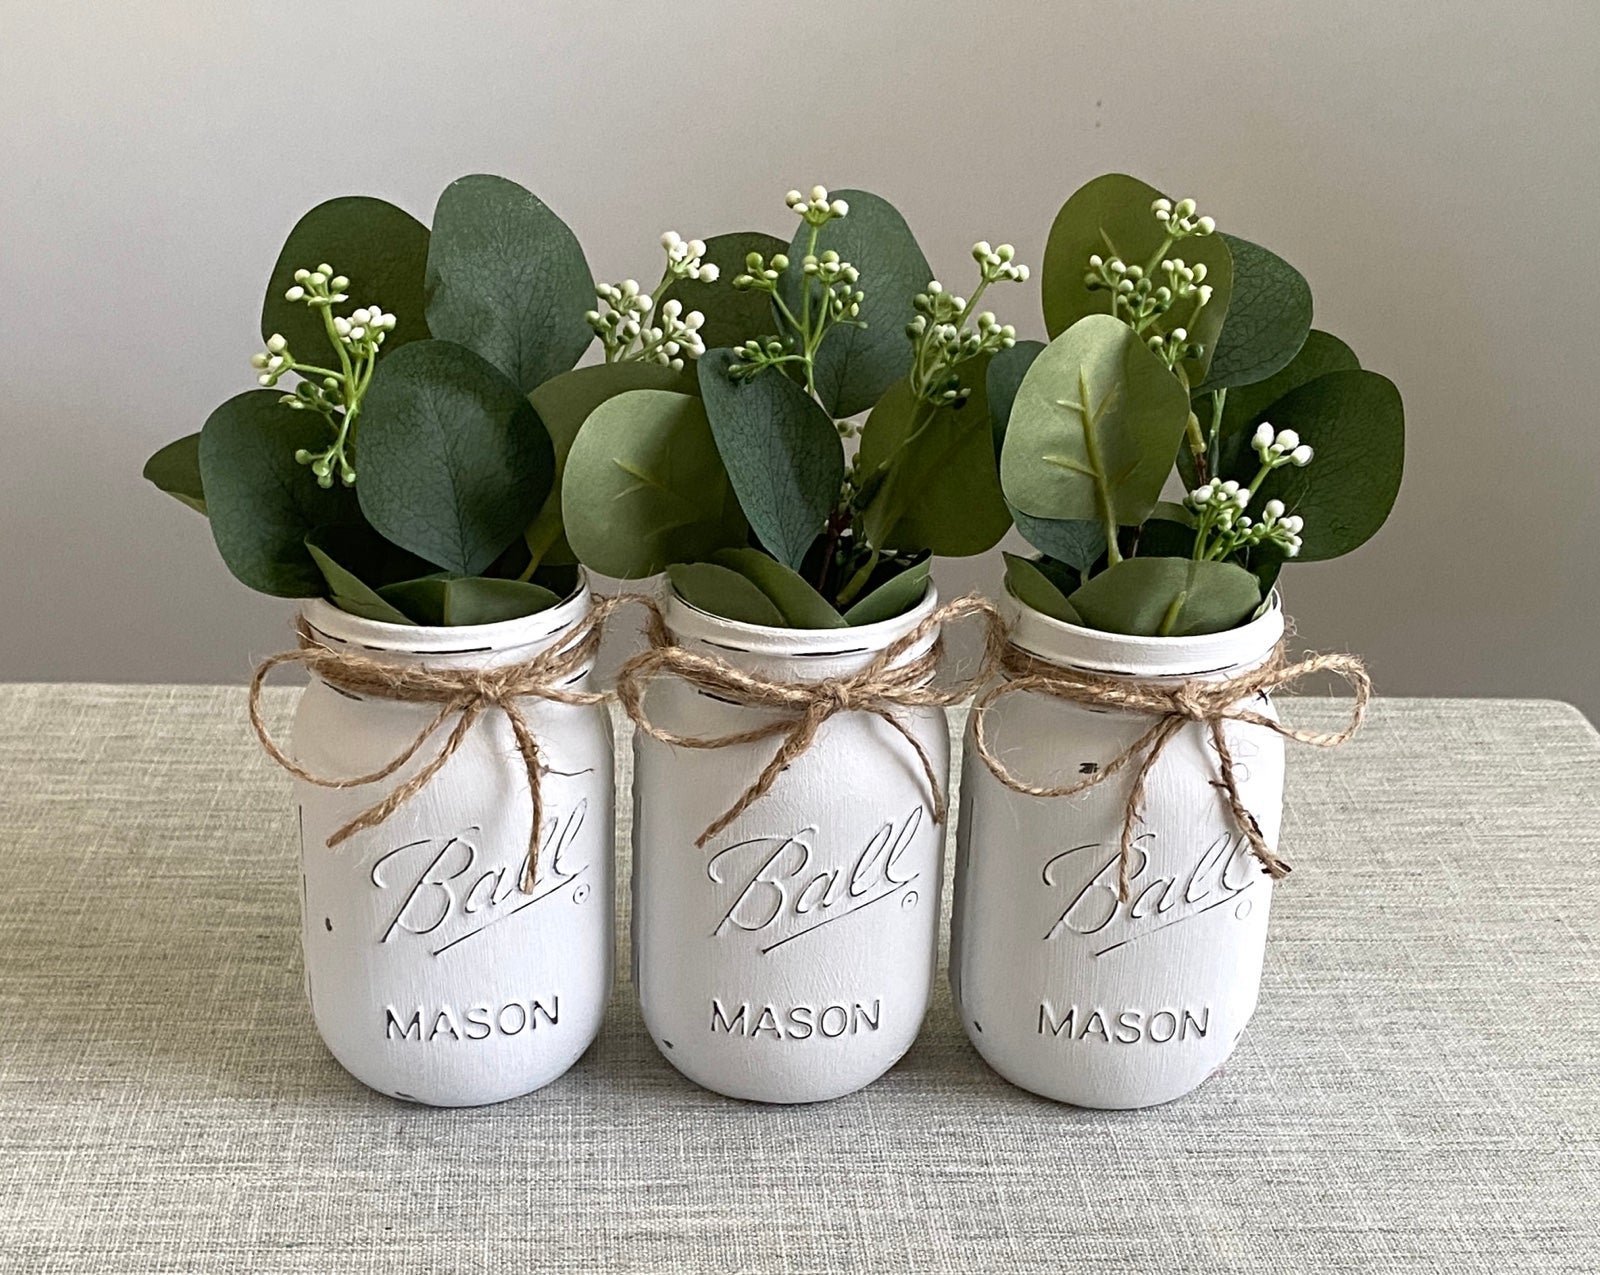 Chalk painted distressed mason jars w/faux eucalyptus included UEFJAd45s Special offer 